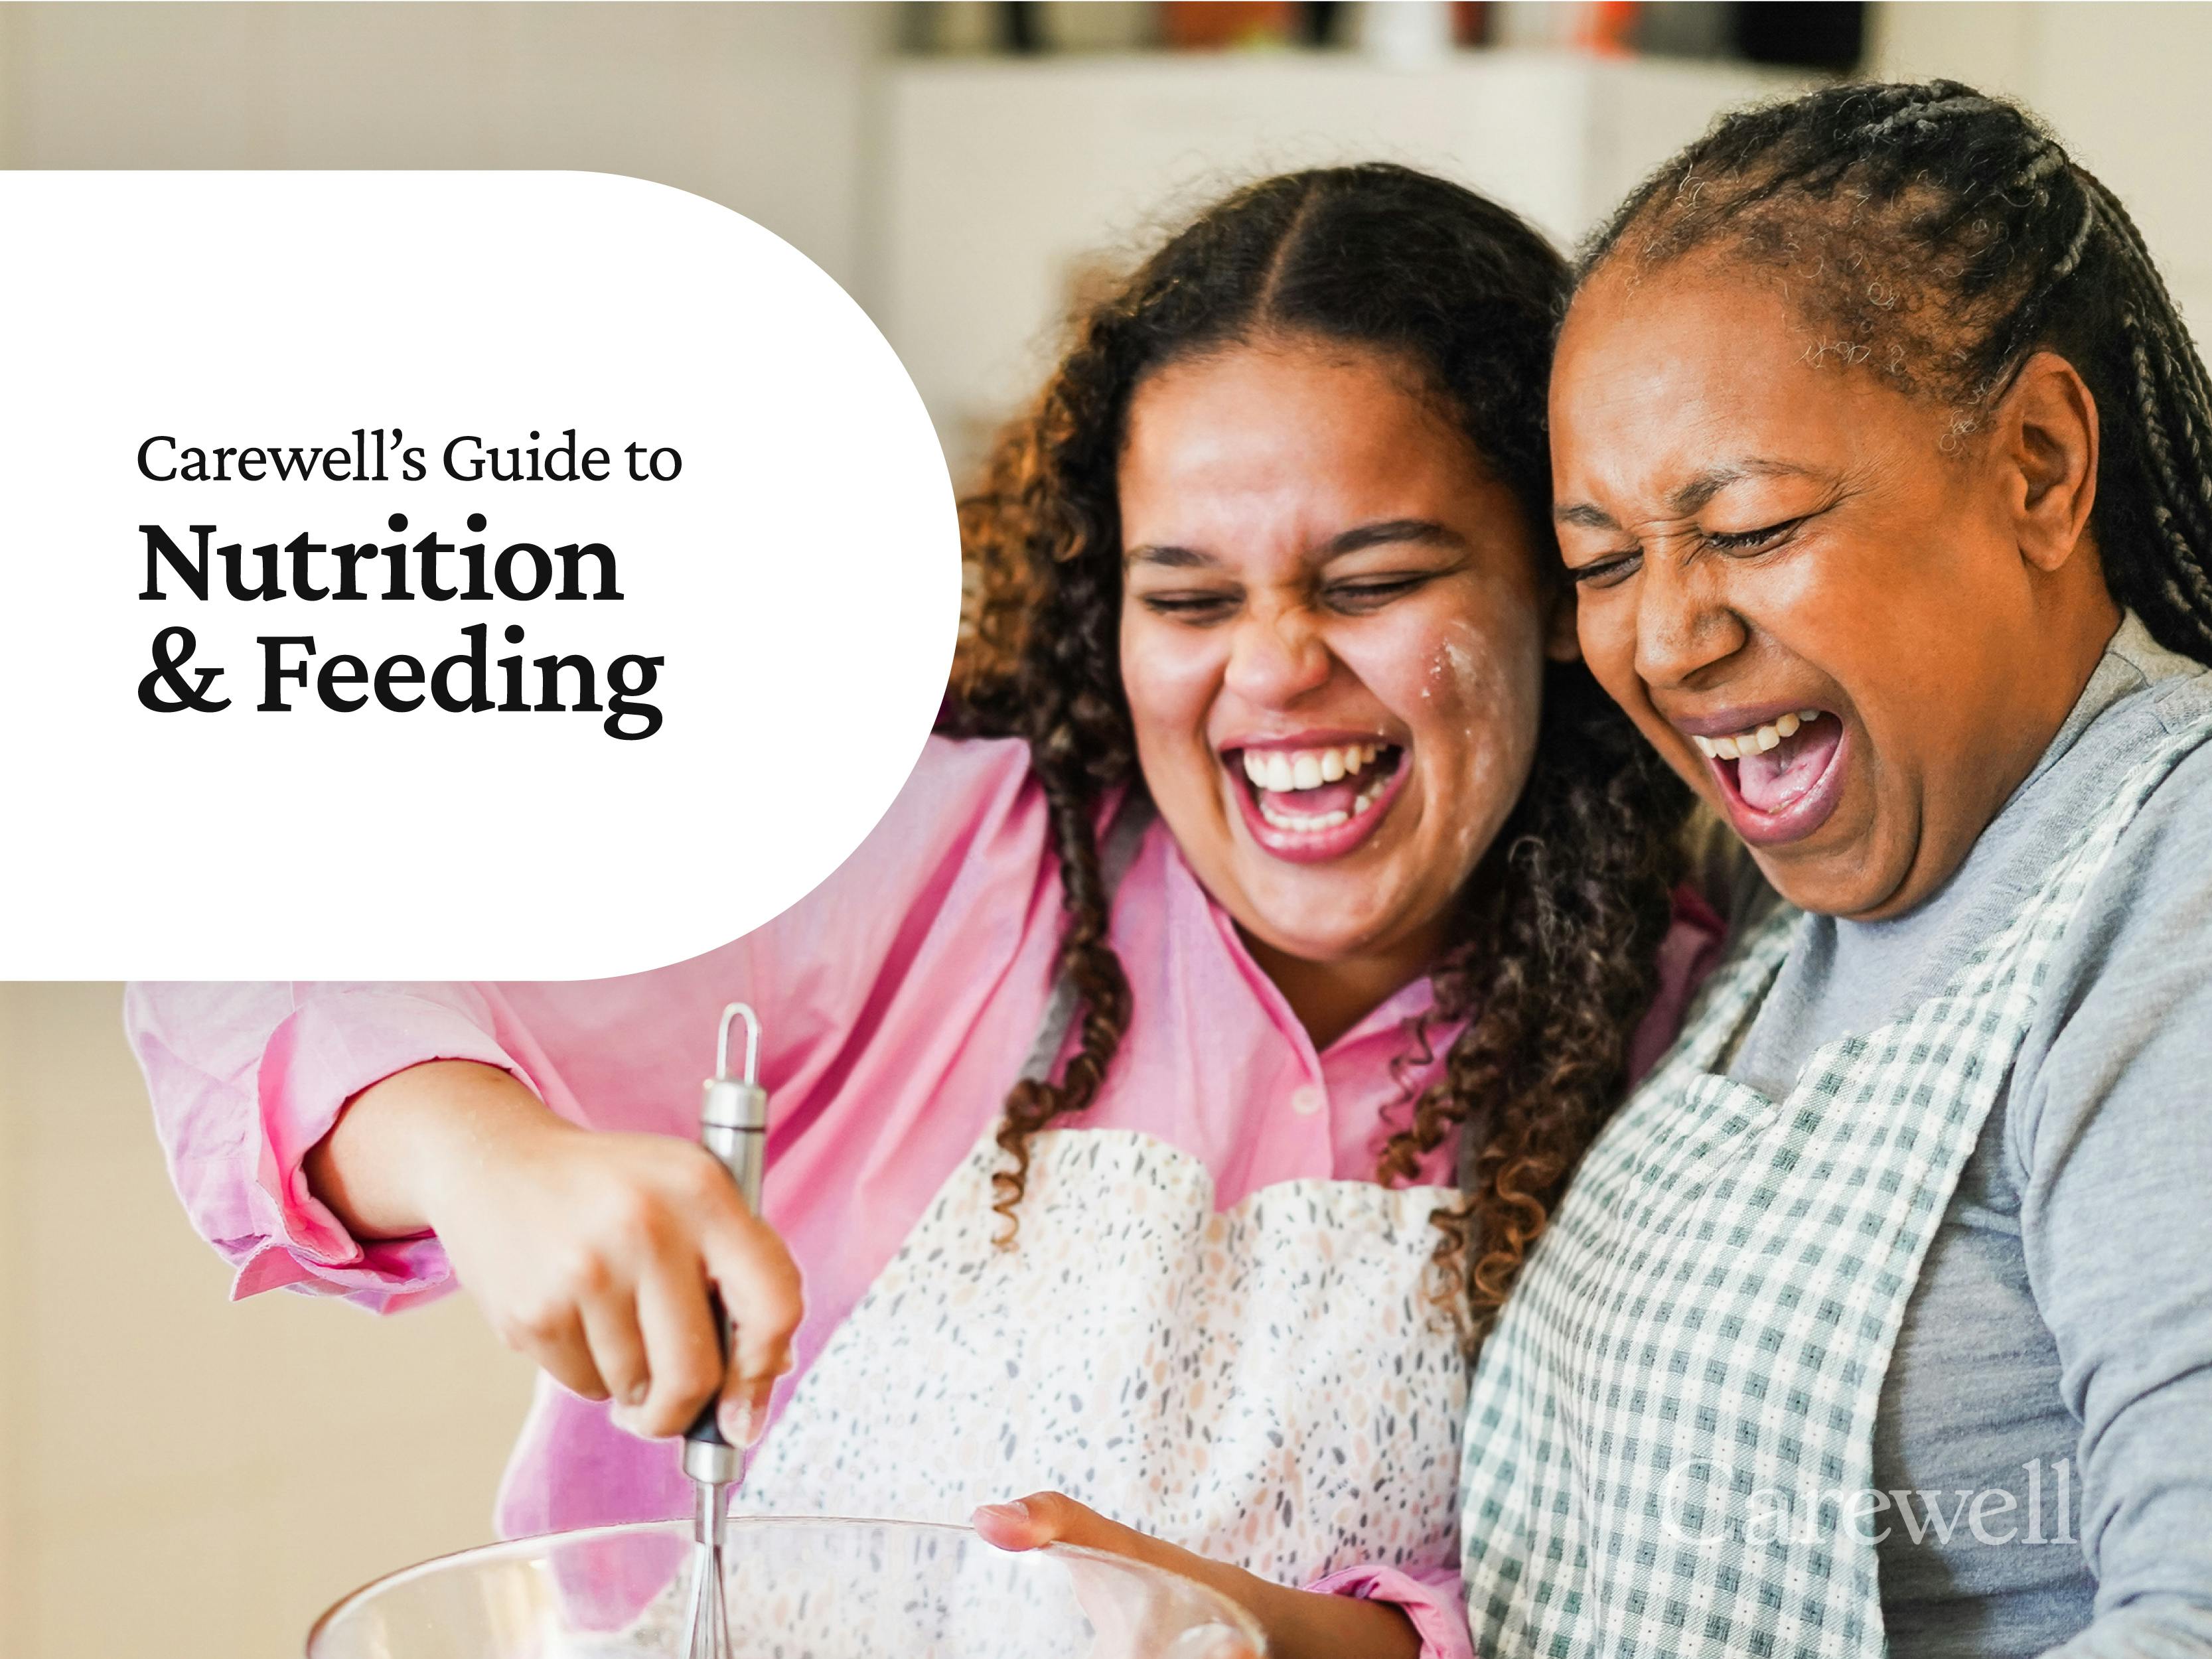 Download Carewell's free guide to Nutrition & Feeding, created to help caregivers navigate common challenges around mealtimes.